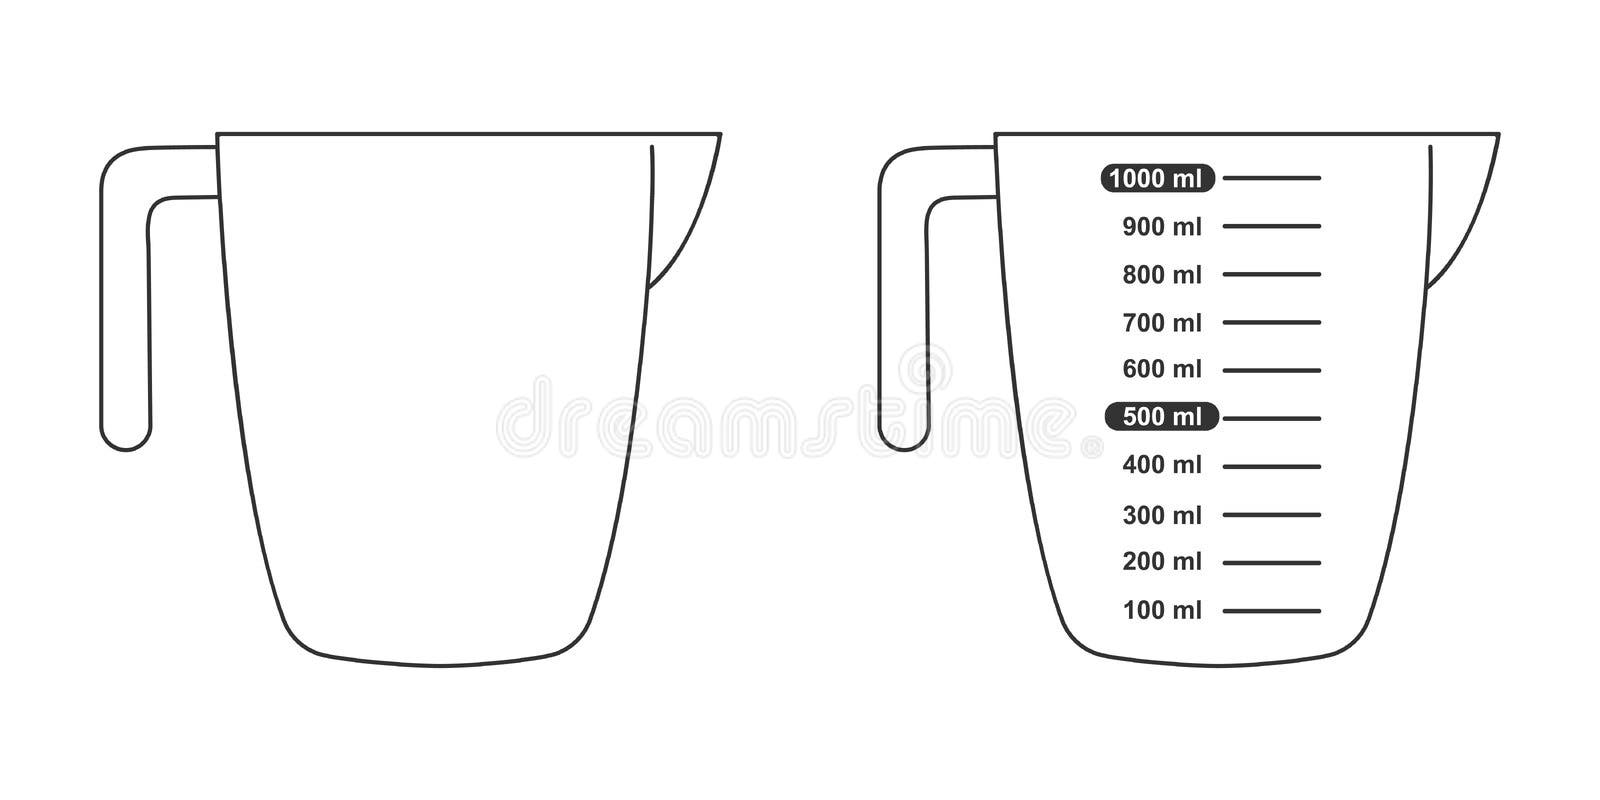 https://thumbs.dreamstime.com/b/liter-volume-measuring-cups-capacity-scale-liquid-containers-cooking-vector-graphic-illustration-260914085.jpg?w=1600